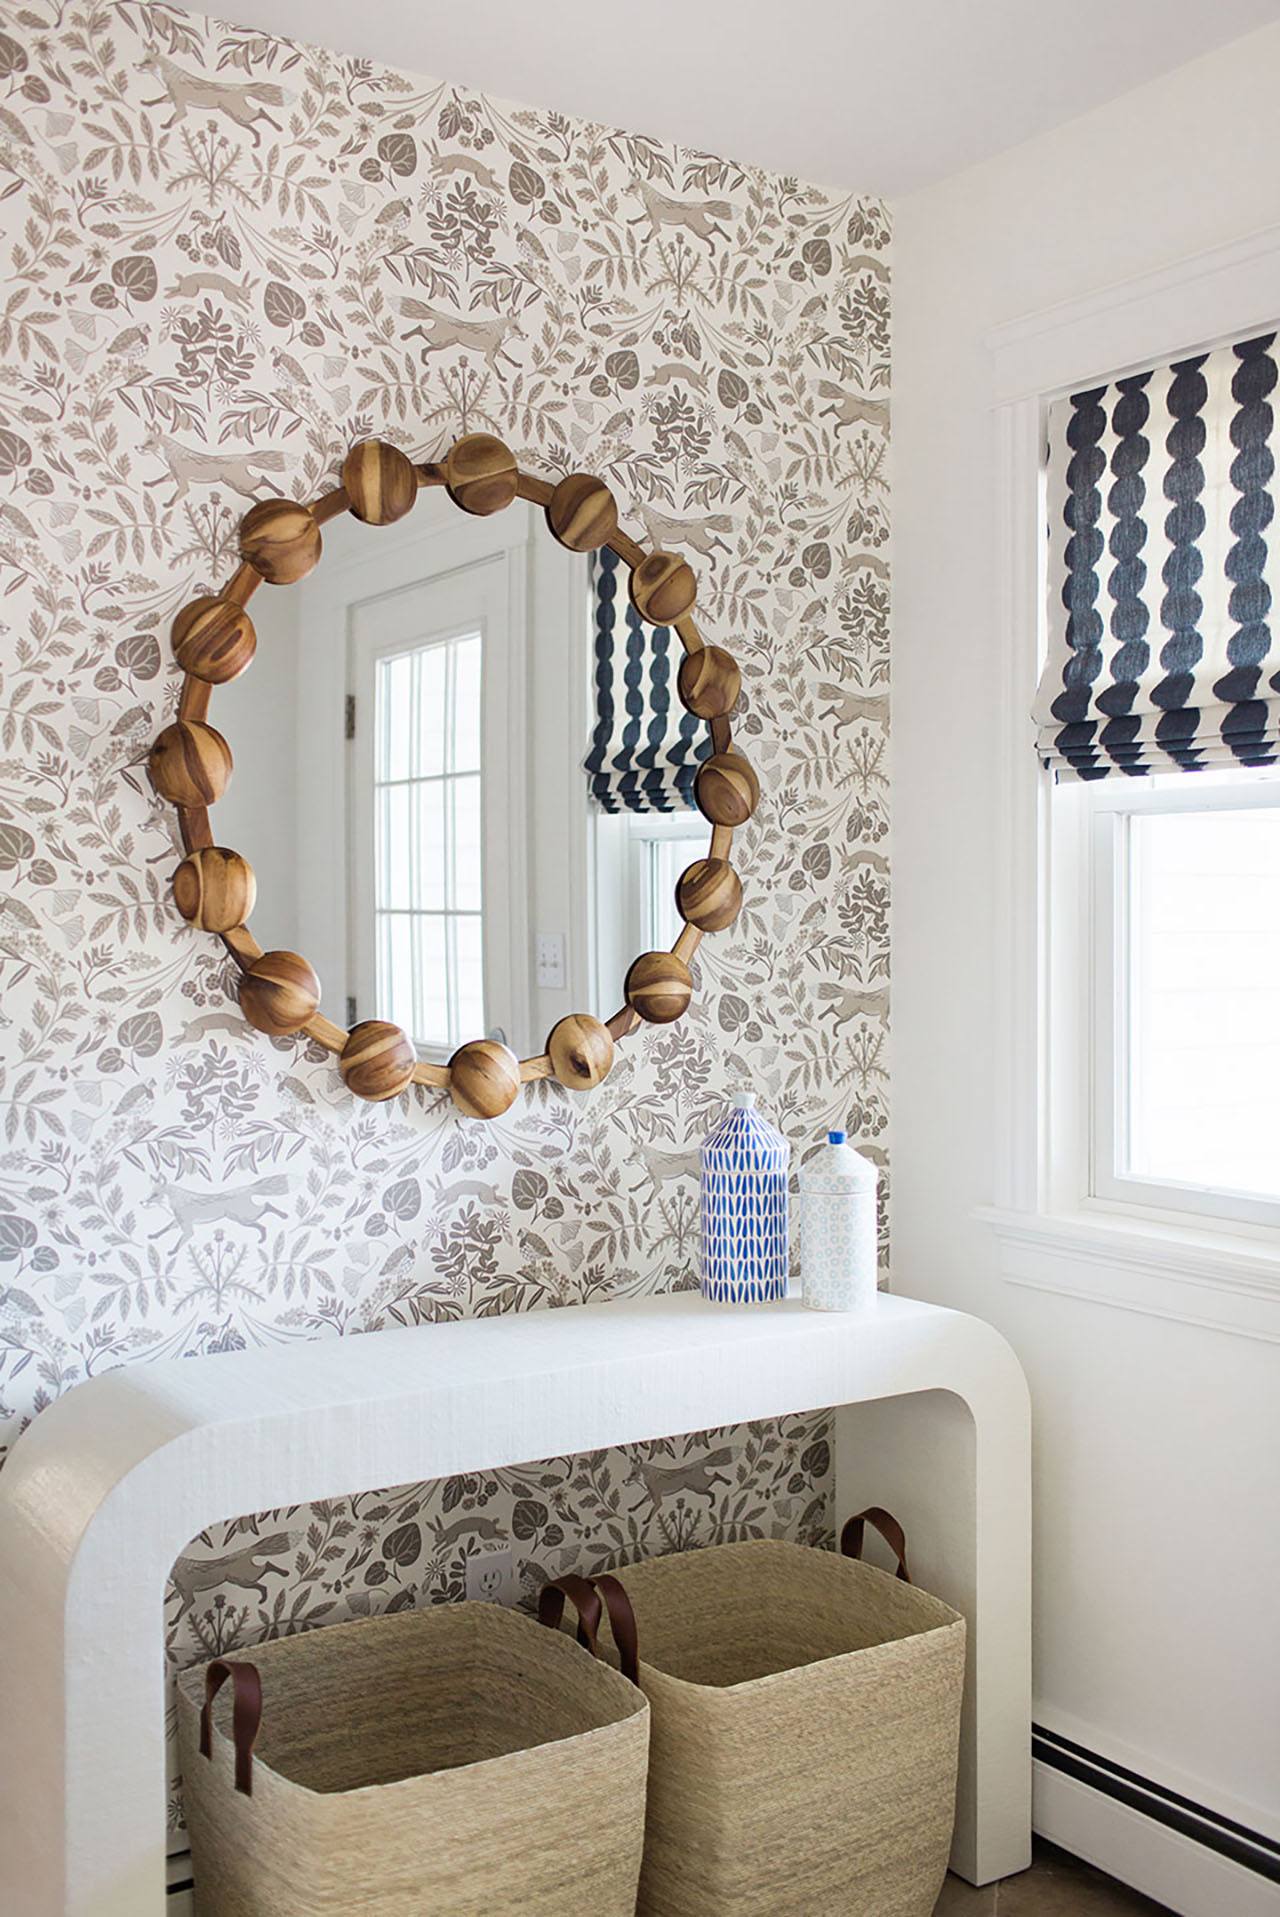 Piedmont (Taupe) wallpapeer | welcoming entryway | designed by Samantha Pappas | Hygge & West